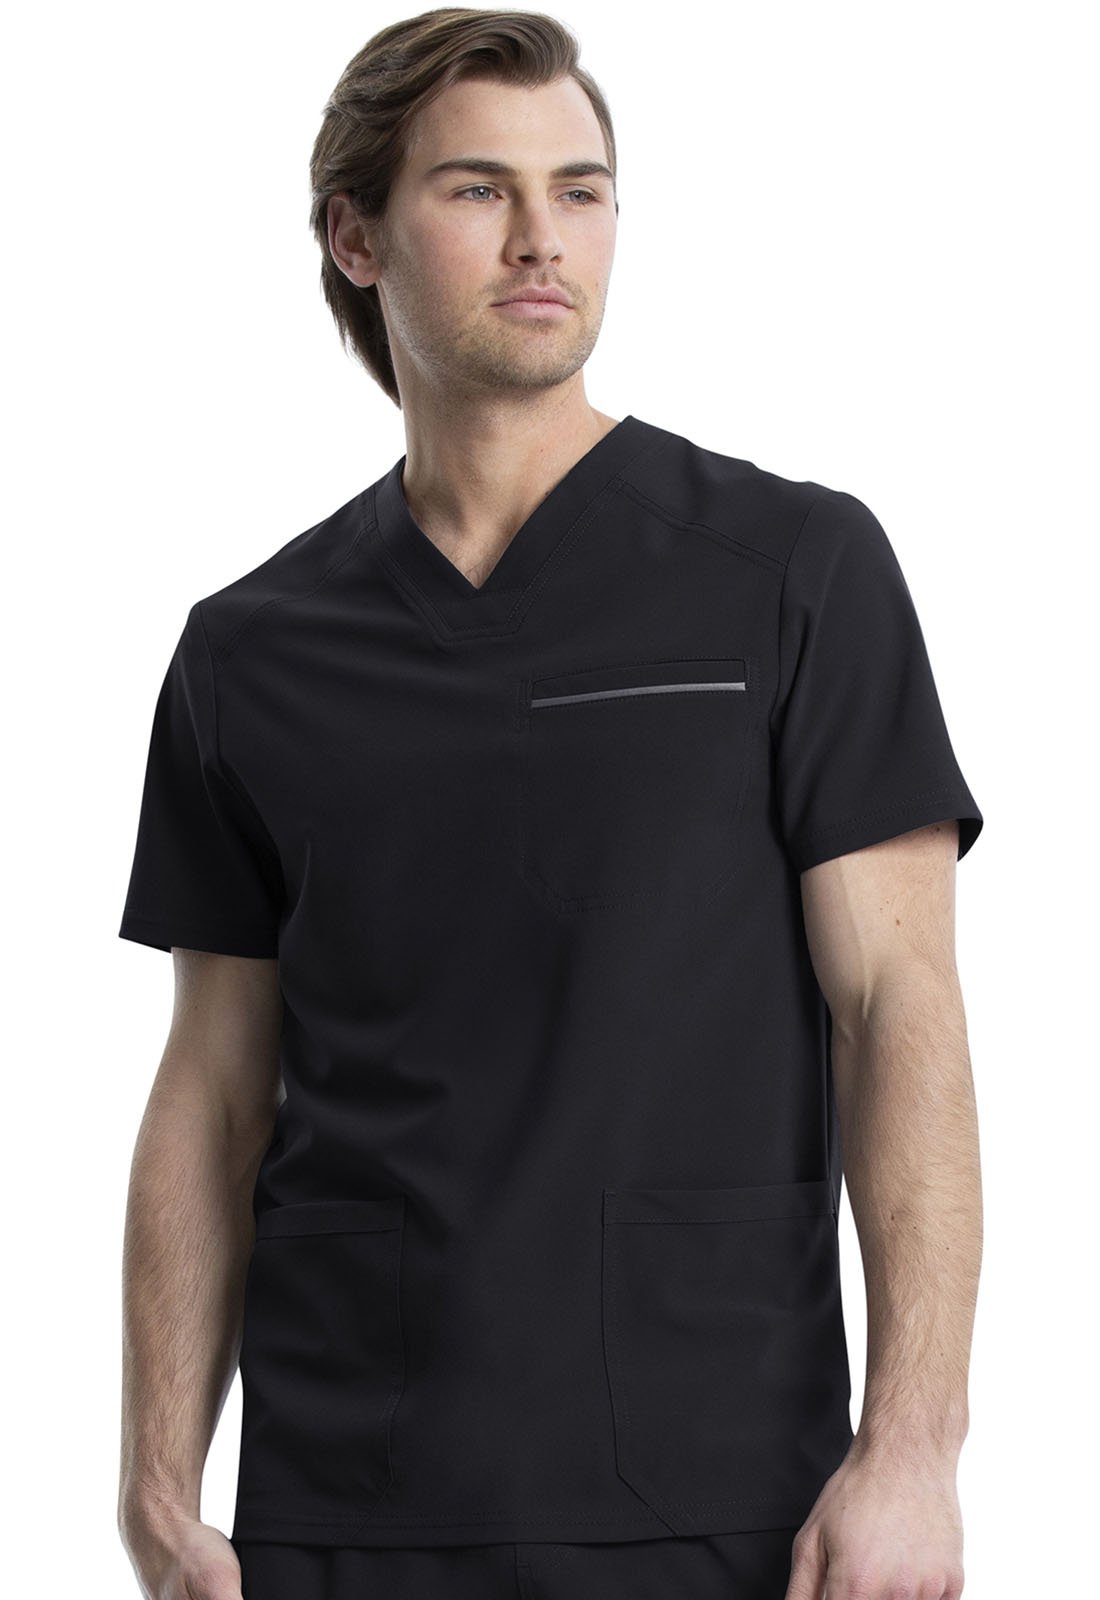 How Scrubs Should Fit: 10 Crucial Factors to Consider for the Perfect ...